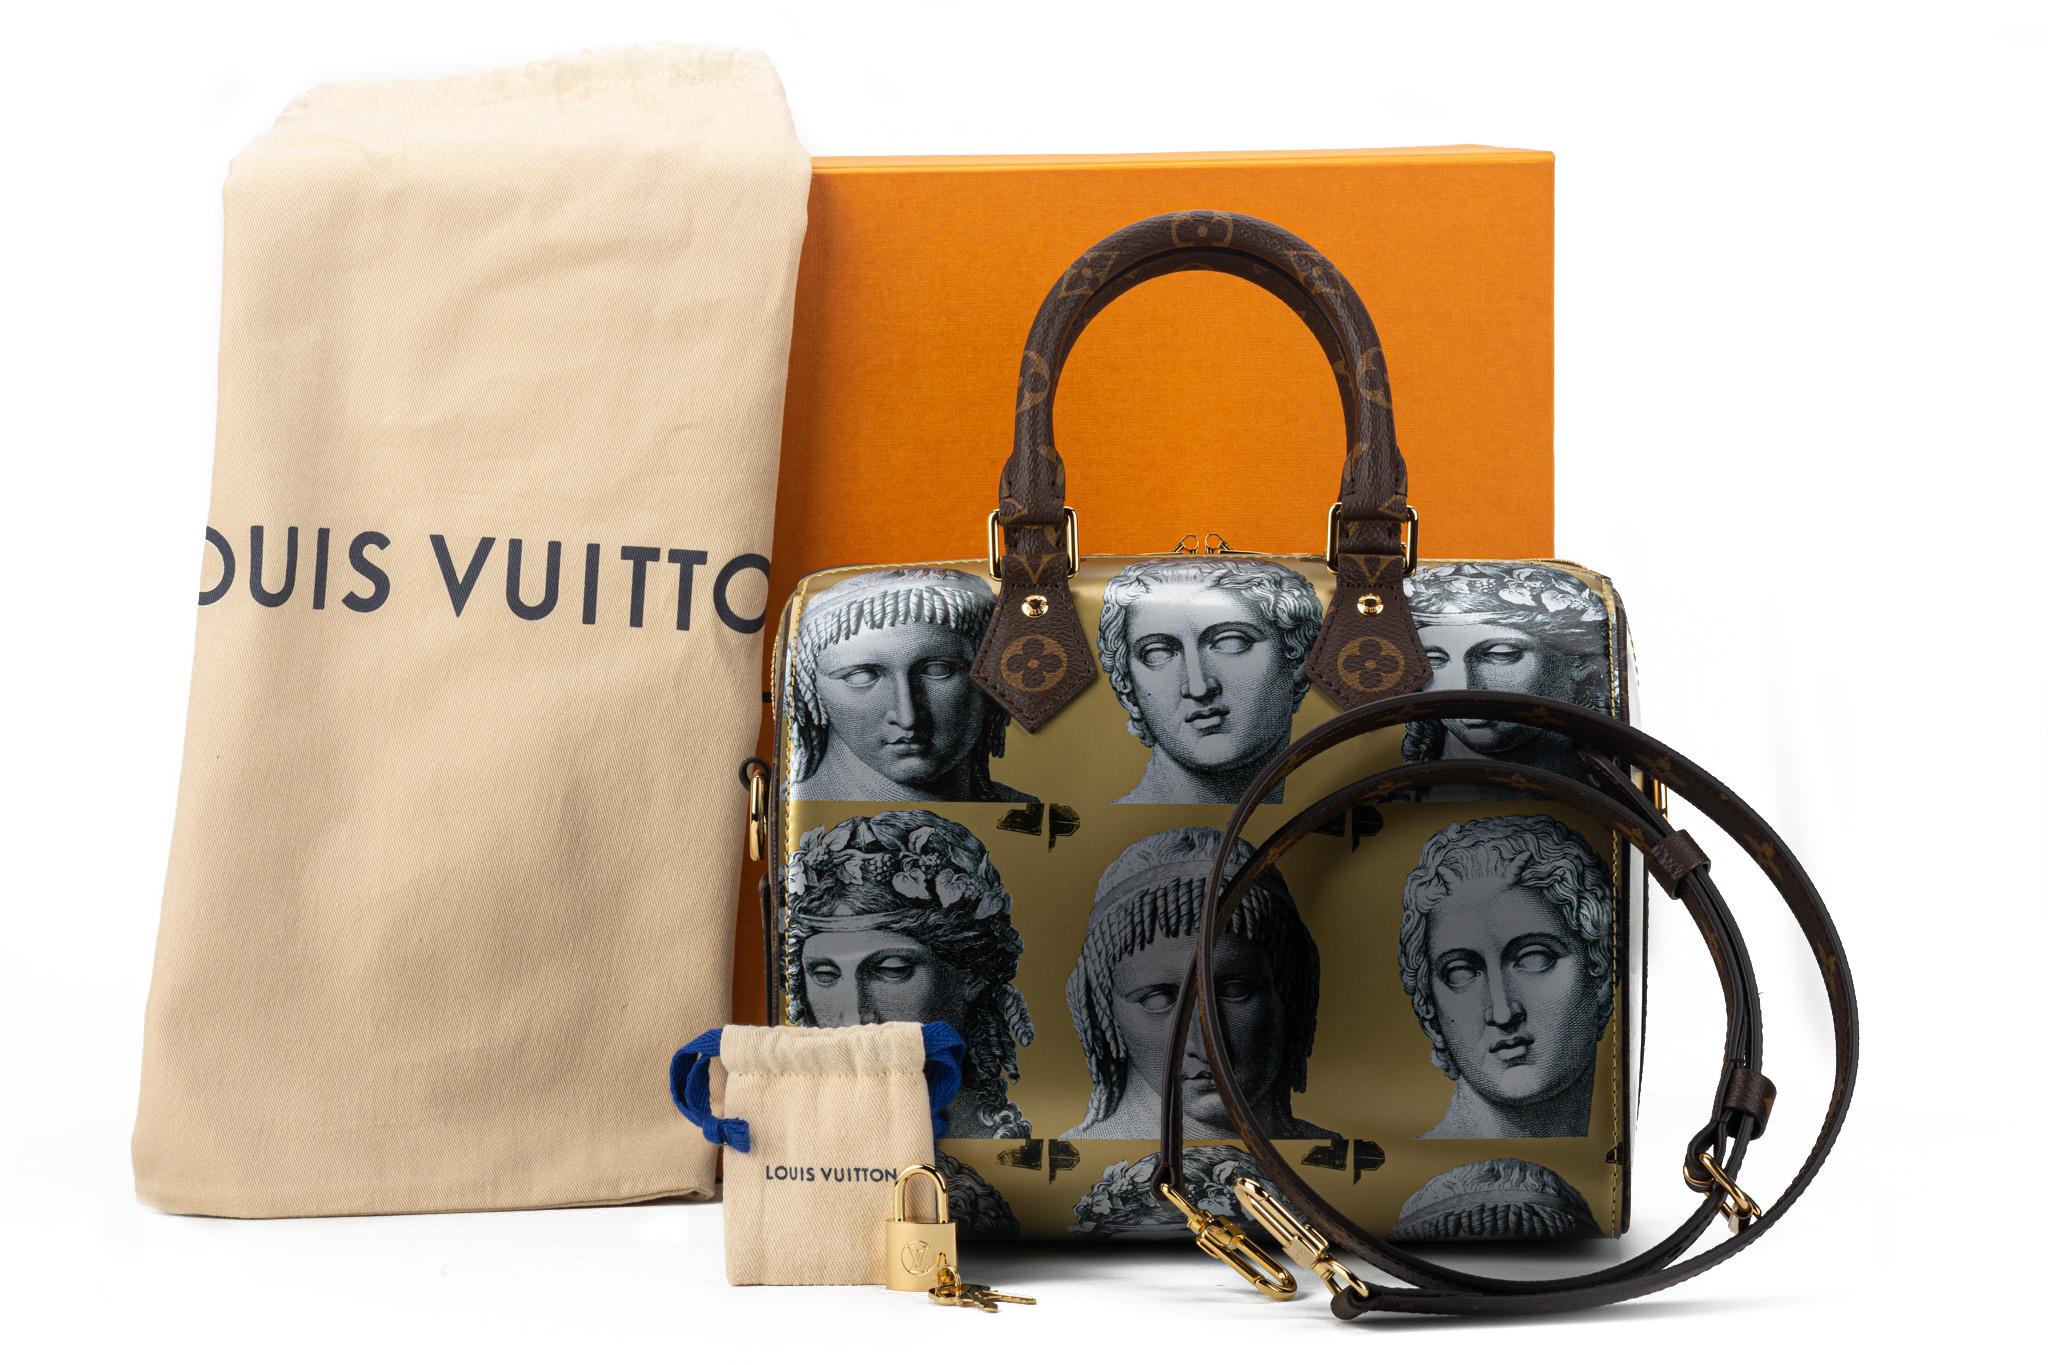 Louis Vuitton 2021 limited edition Fornasetti collection designed by Nicolas Ghesquière. Sold out worldwide speedy bandouliere 25 cm in printed patent leather, gold metal hardware and vuitton coated canvas monogram details.Detachable strap, lock and